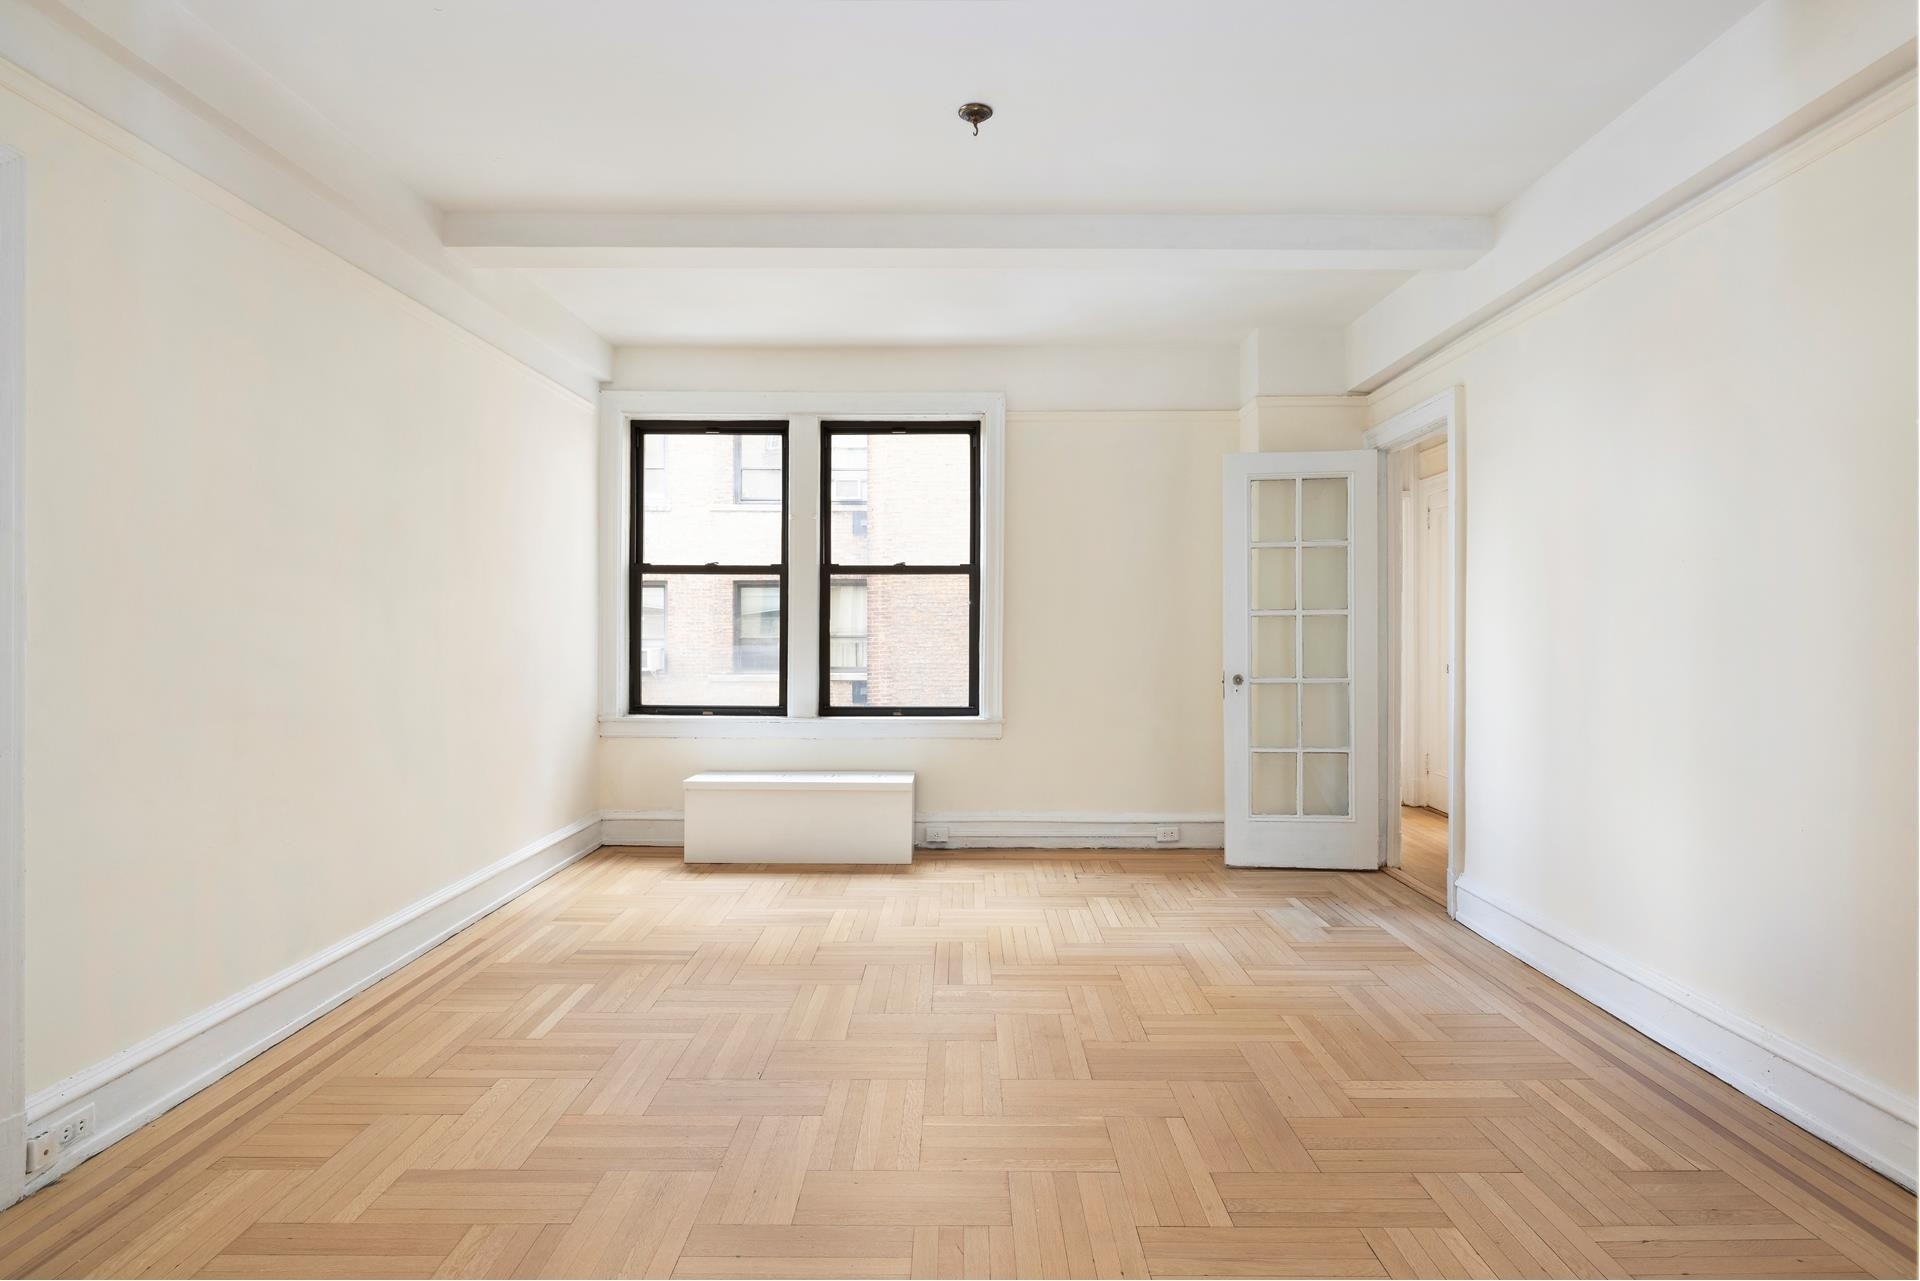 6. Co-op Properties for Sale at 171 W 79TH ST, 91 Upper West Side, New York, NY 10024